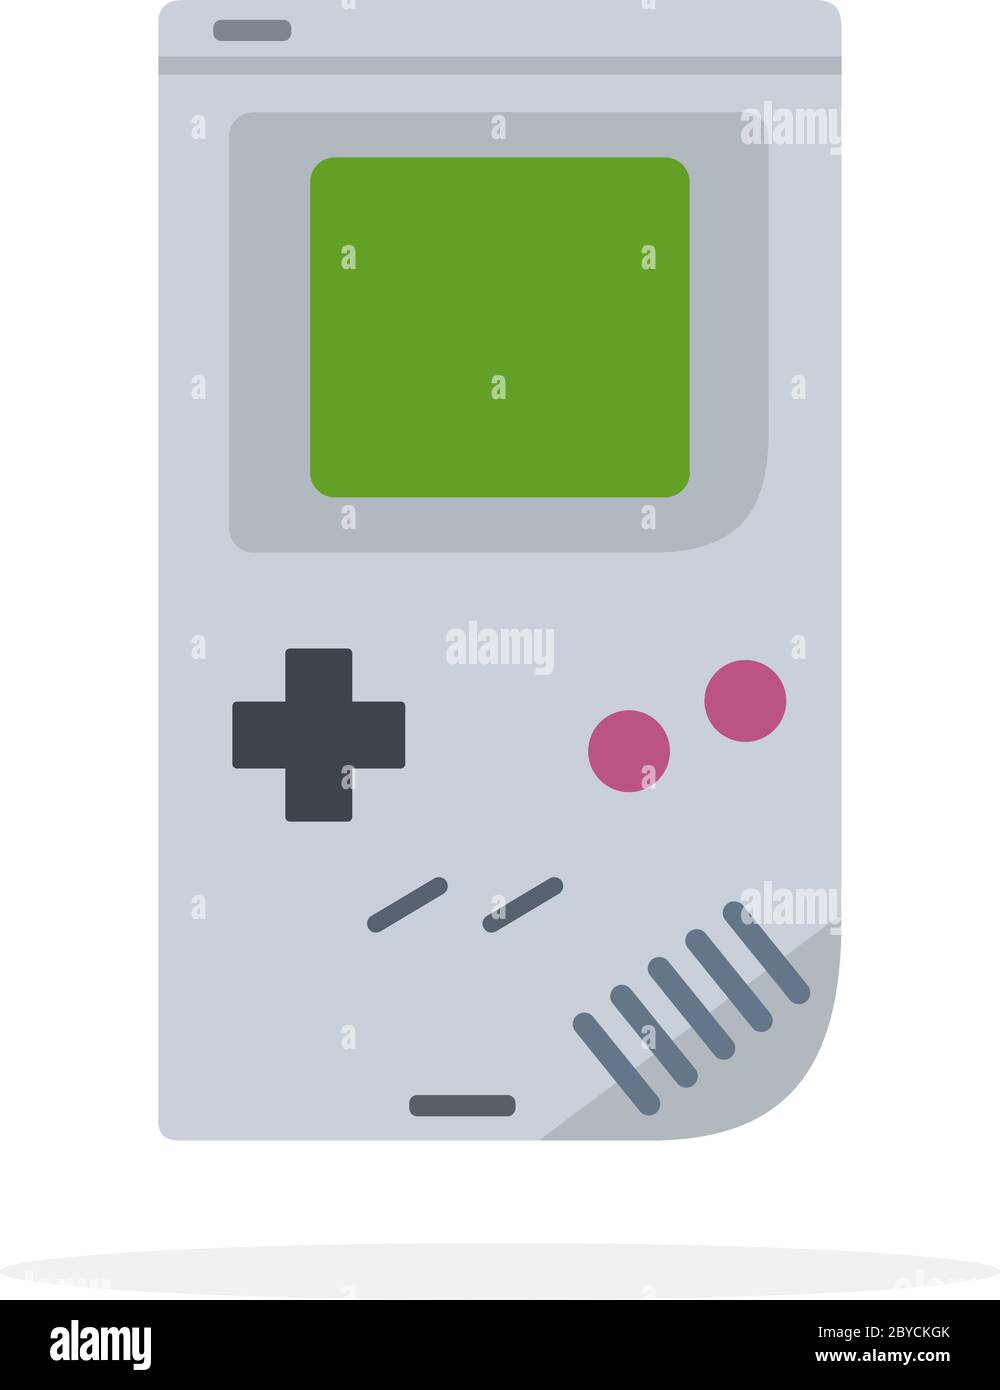 Computer game pad tetris vector icon flat isolated Stock Vector